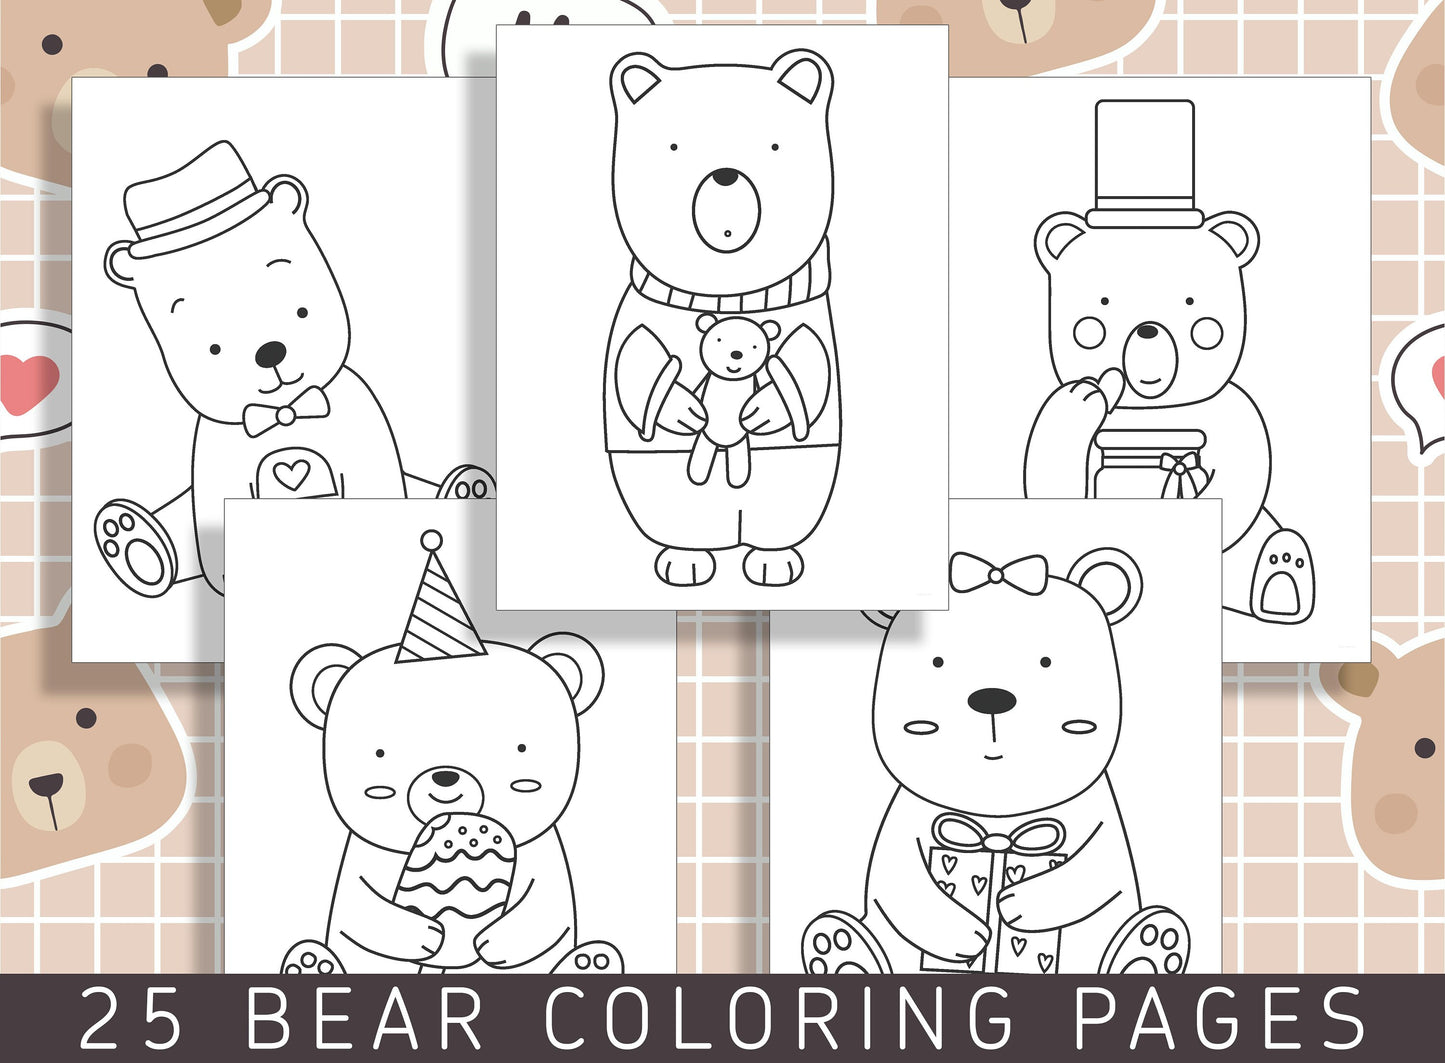 25 Adorable Bear Coloring Pages for Preschool and Kindergarten Kids, PDF File, Instant Download